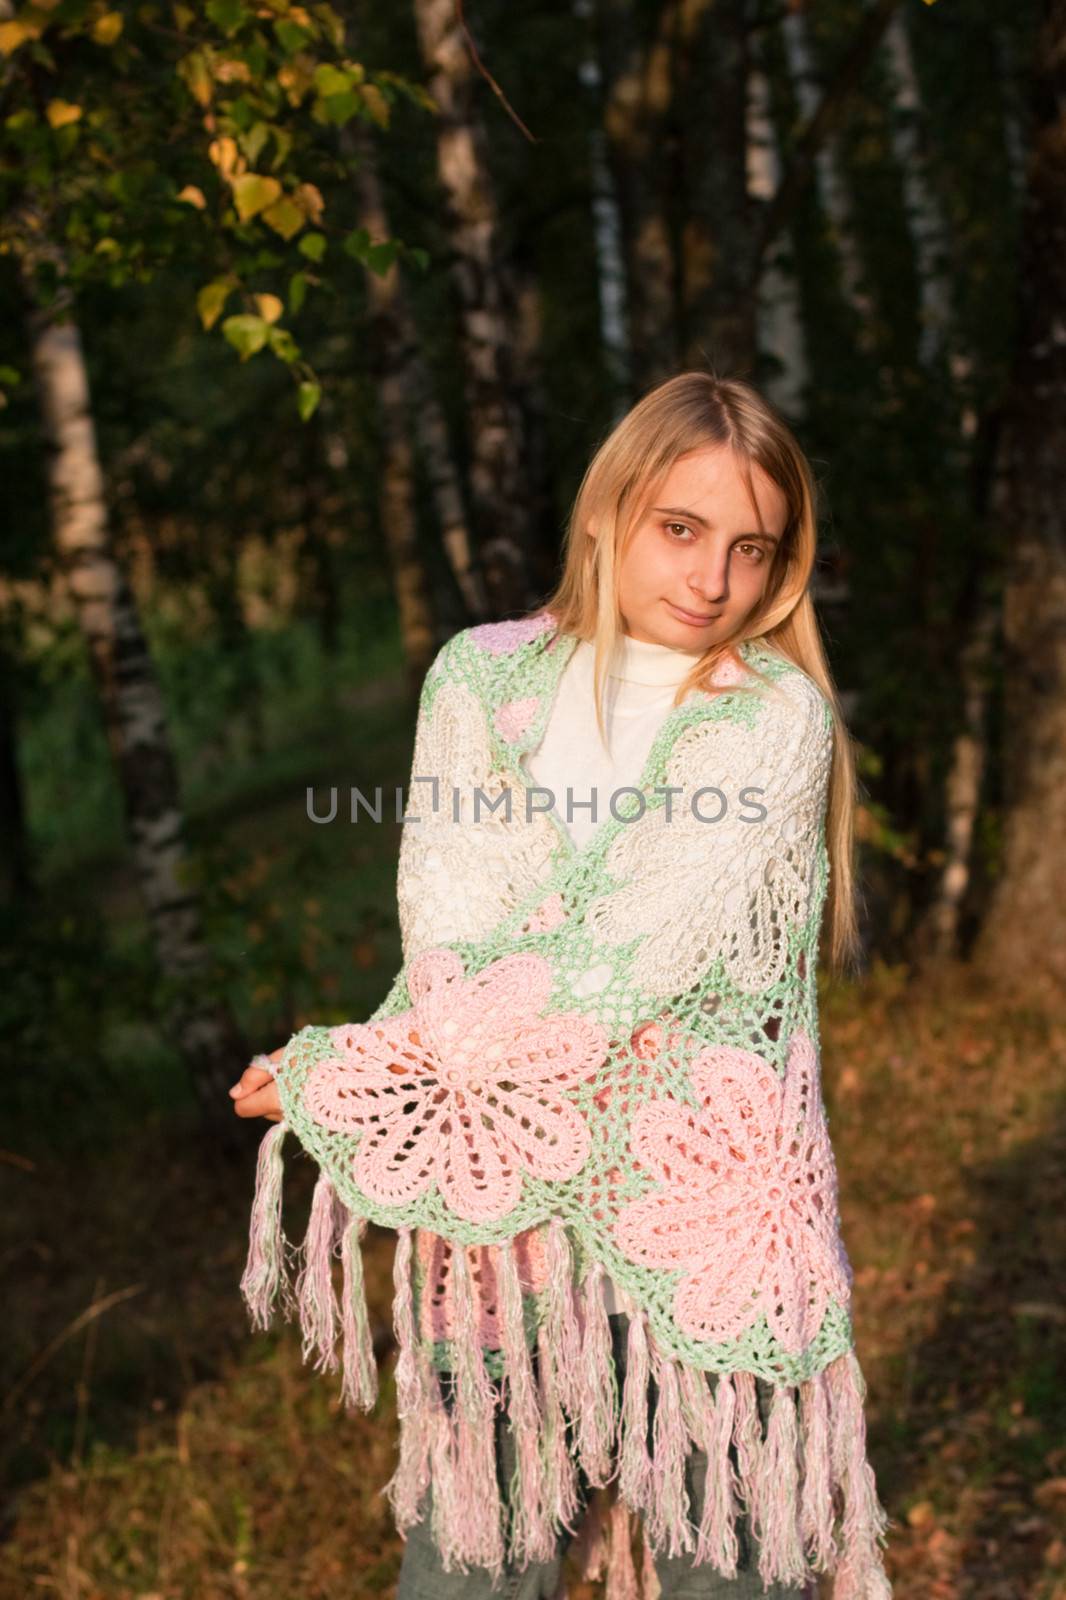 A standing blonde girl in a swal and jeans in a forest
